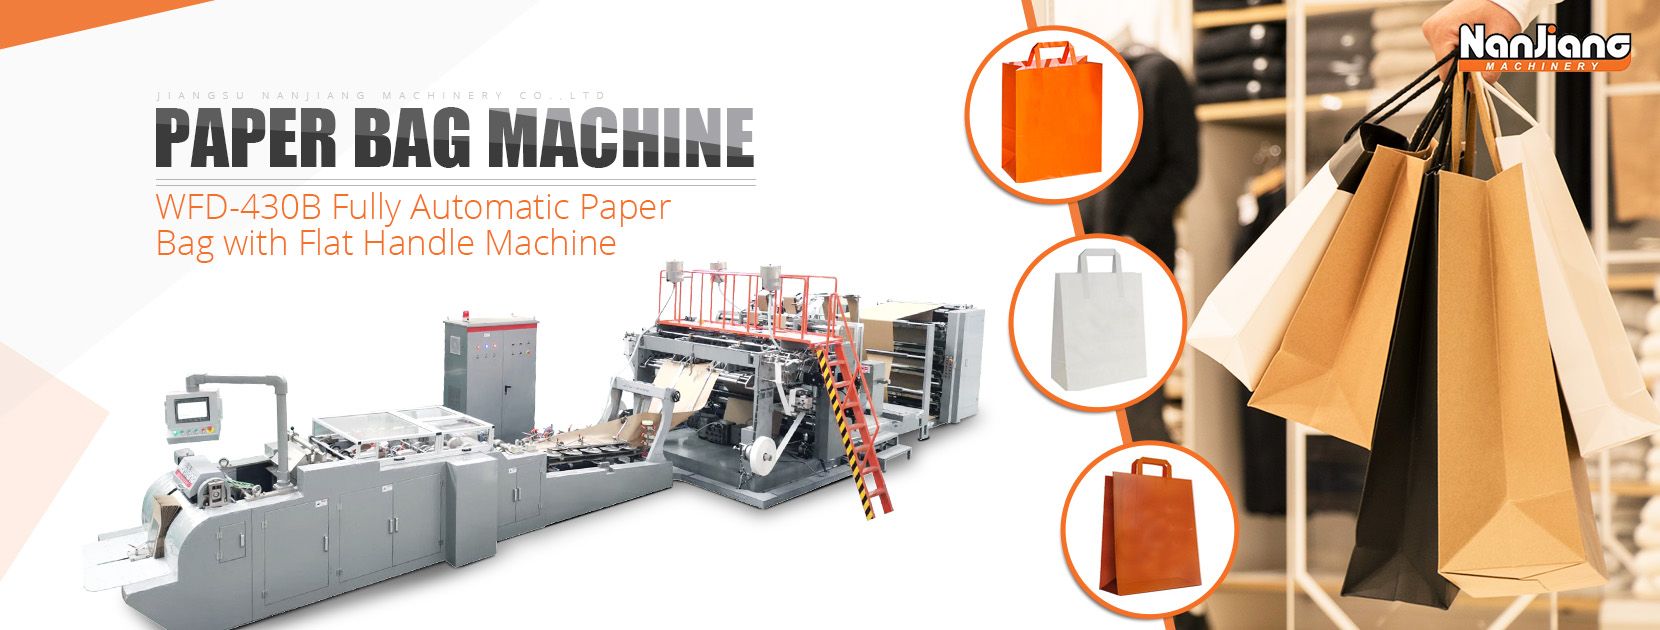 Fully Automatic Roll Fed Inside Flat Handle Paper Bag Machine